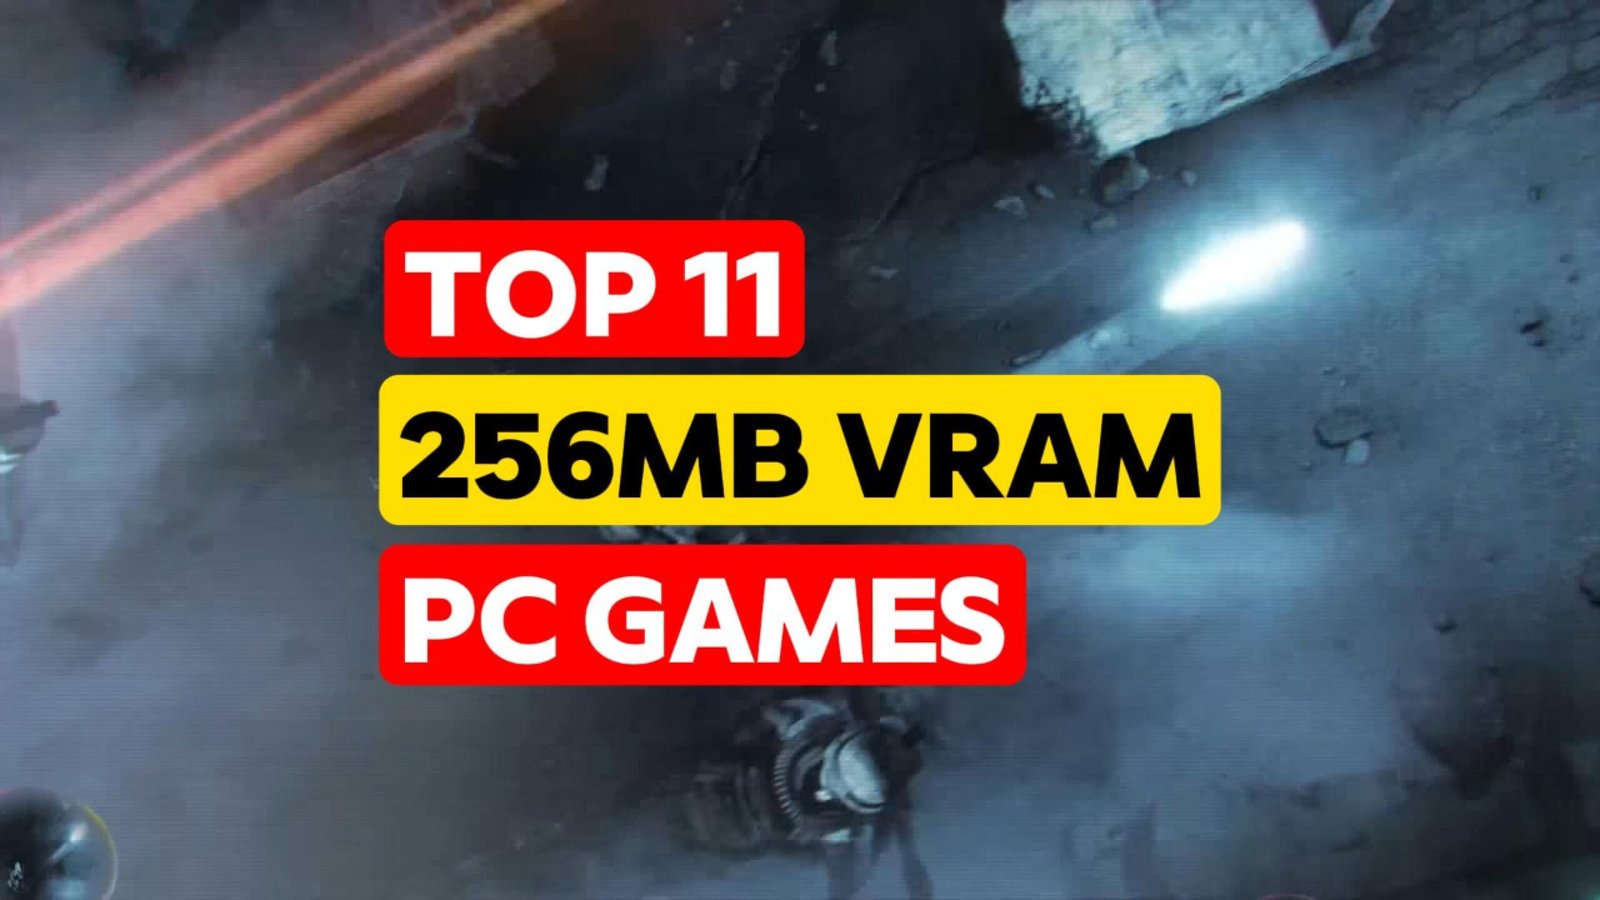 Top 11 PC Games For 256MB VRAM